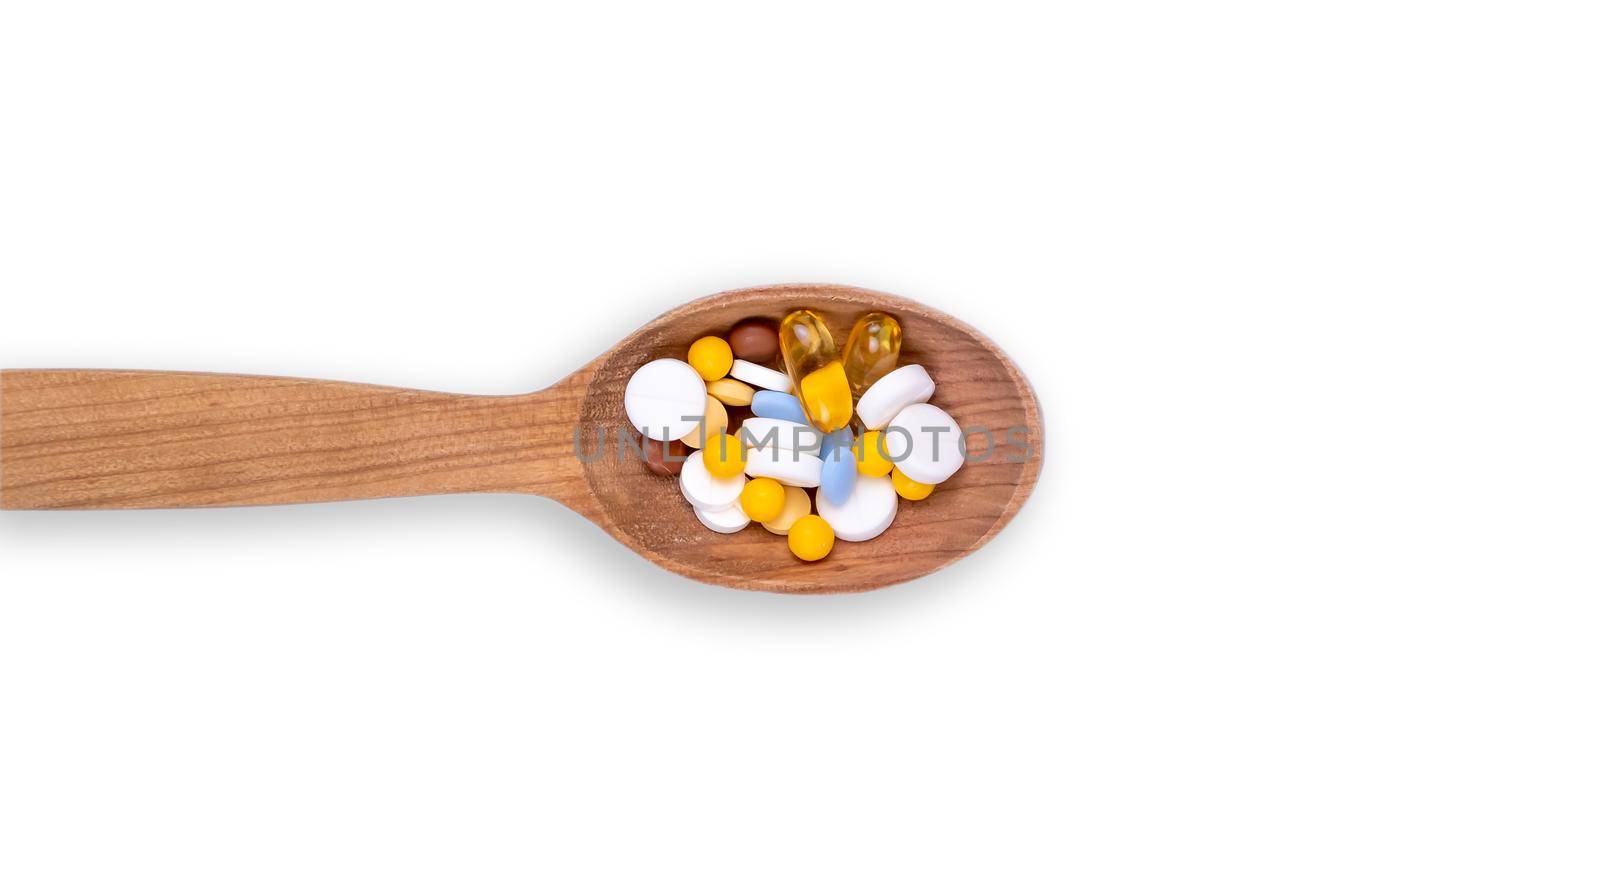 Medicine, pills and drug in wood spoon on white background with copy space.